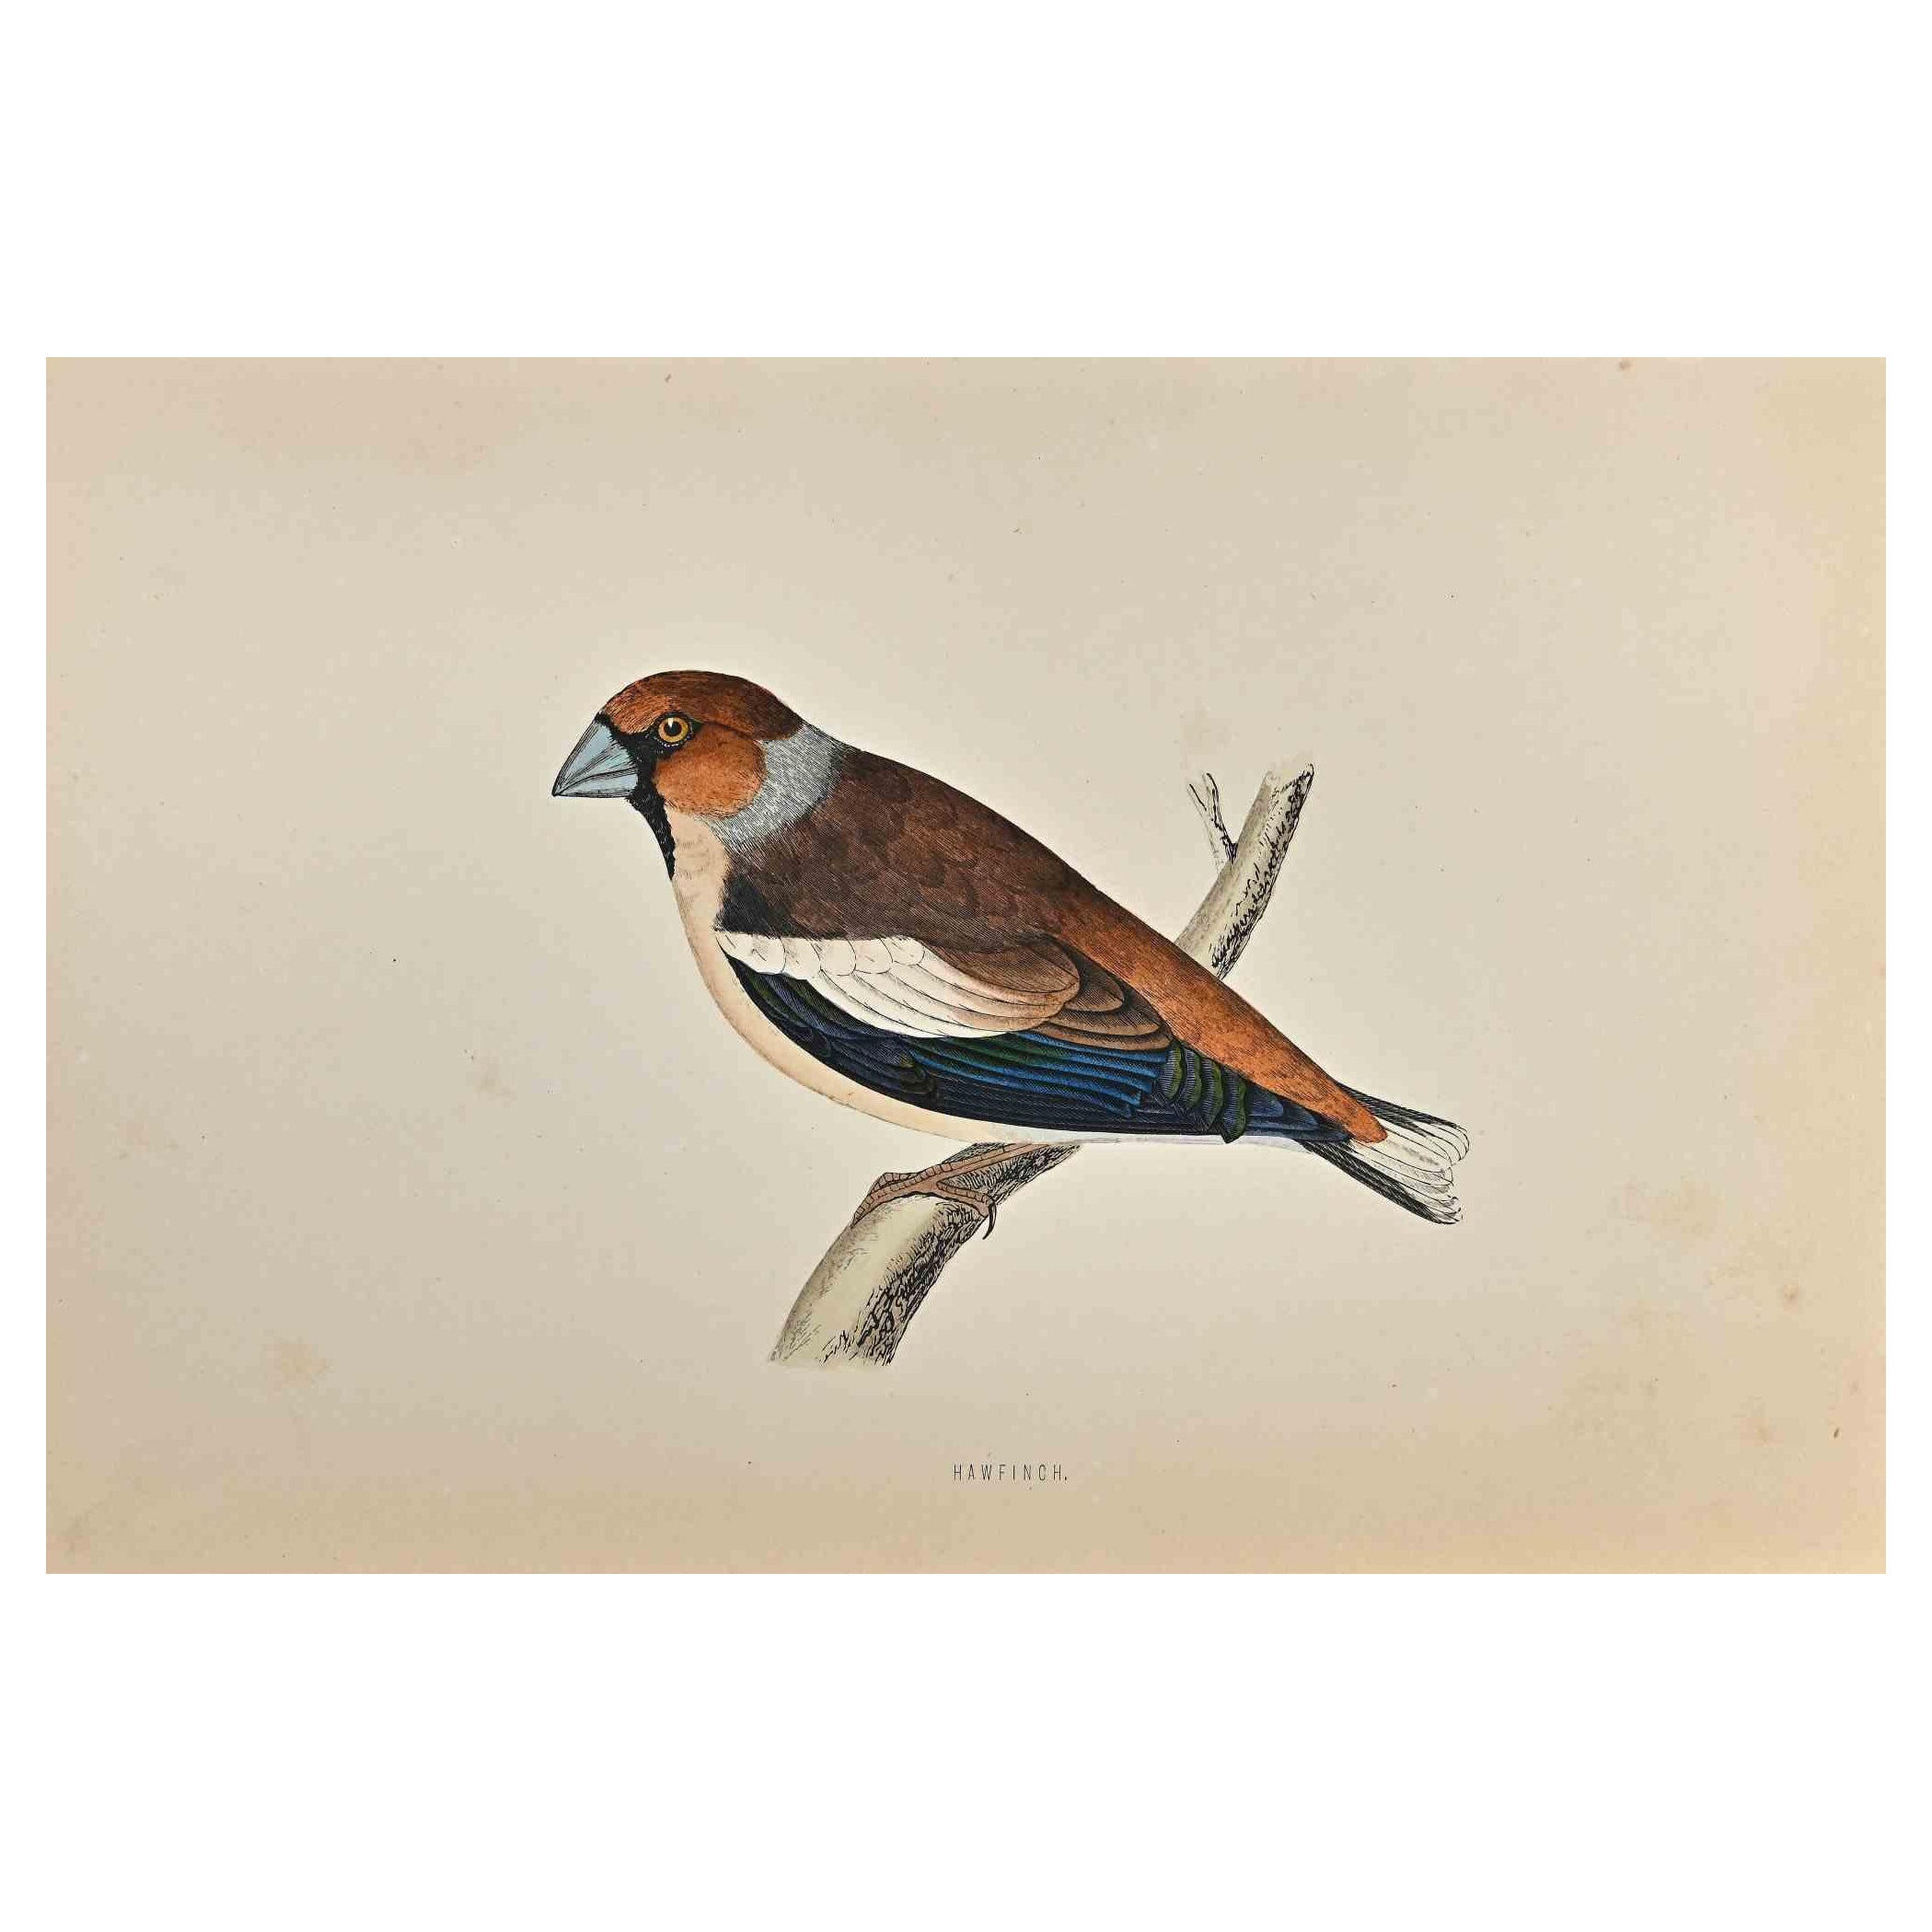 Hawfinch  is a modern artwork realized in 1870 by the British artist Alexander Francis Lydon (1836-1917) . 

Woodcut print, hand colored, published by London, Bell & Sons, 1870.  Name of the bird printed in plate. This work is part of a print suite